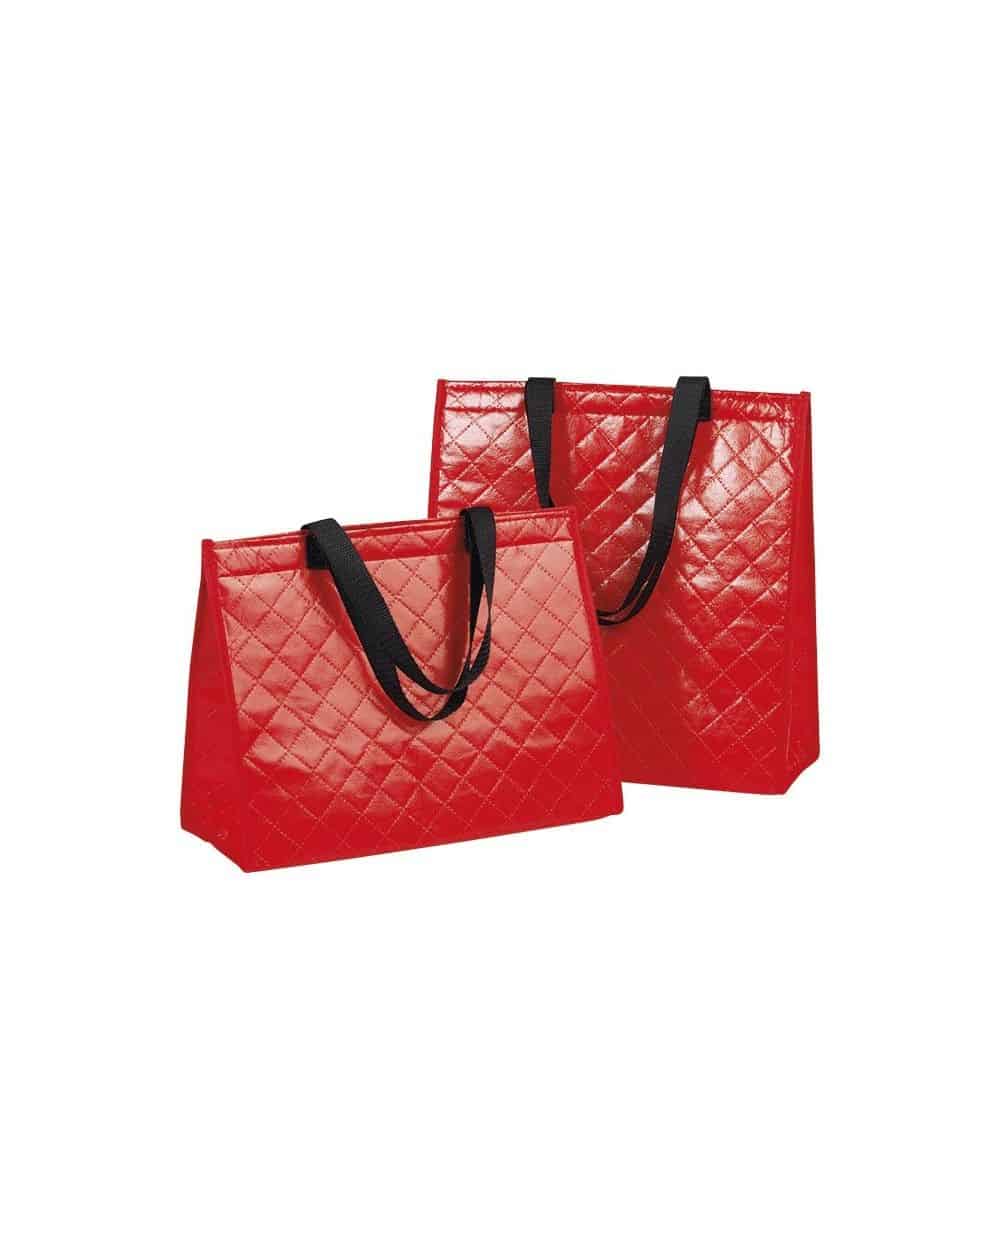 Sac isotherme rectangle rouge 2 anses